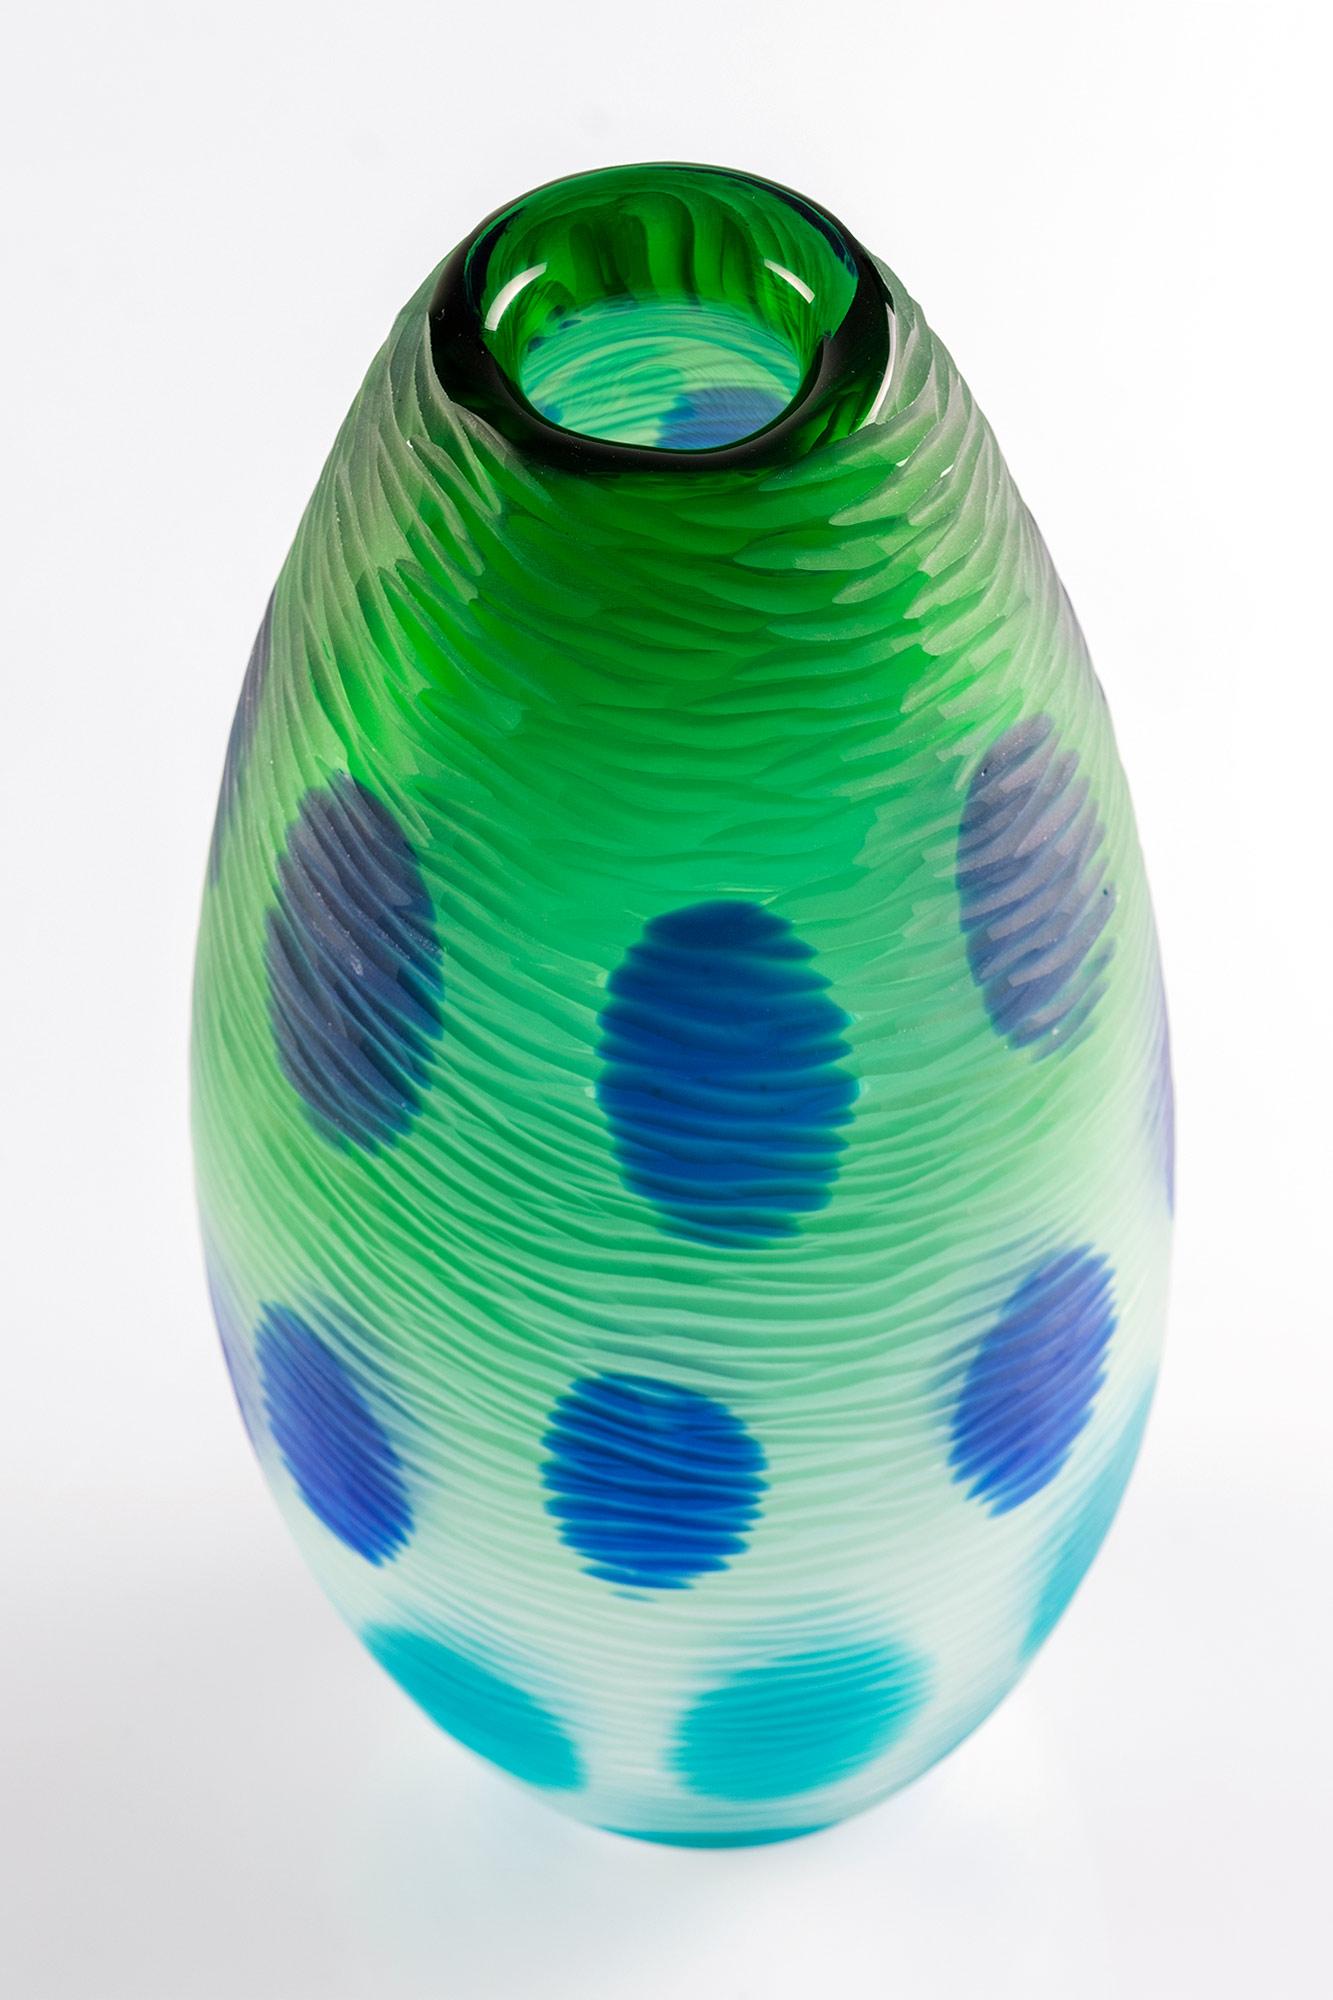 Fabulous Unique Piece Murano Glass Vase by Paolo Crepax, Italy. 
Etched signature and label on the underside.